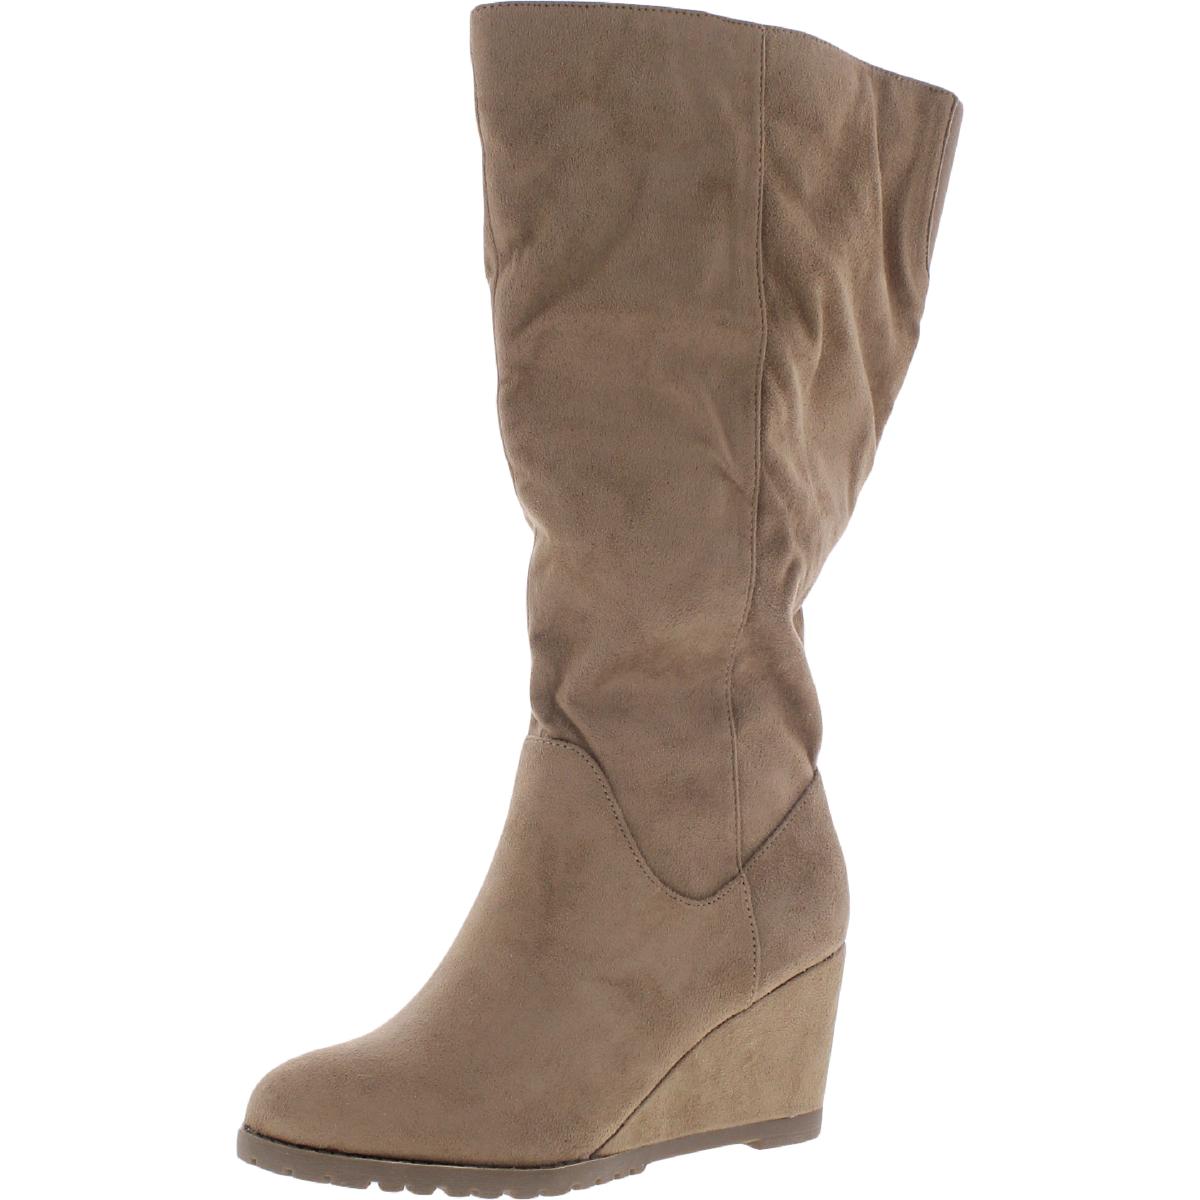 Journee Collection Womens Extra Wide Calf Faux Suede Mid-Calf Boots